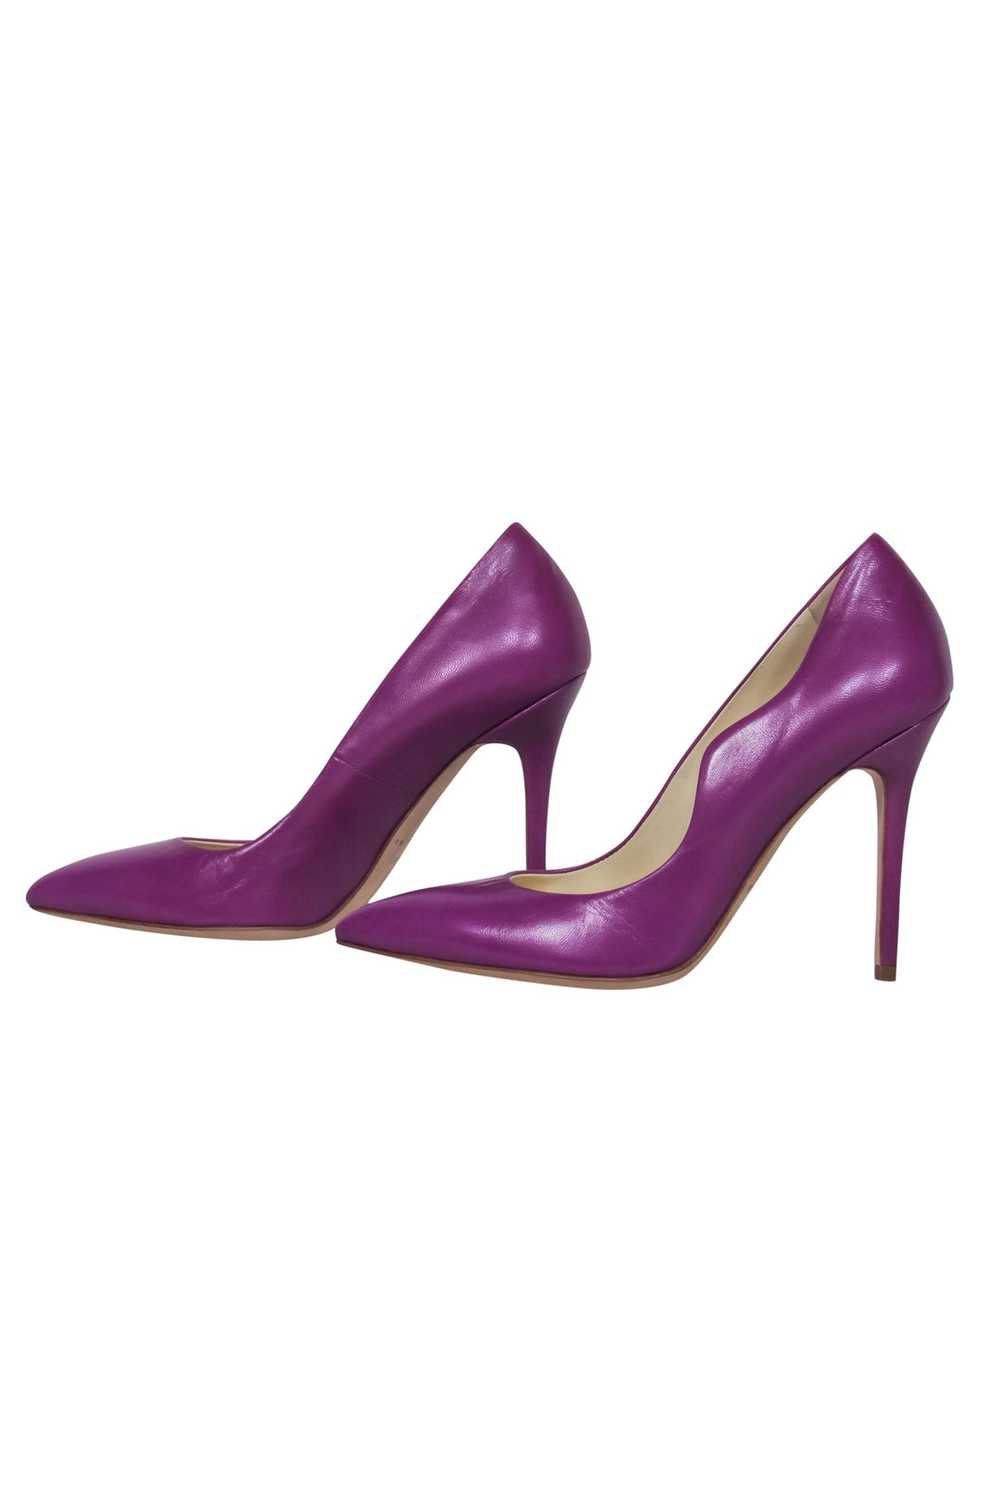 Brian Atwood - Purple Leather Pointed Toe Pumps S… - image 3